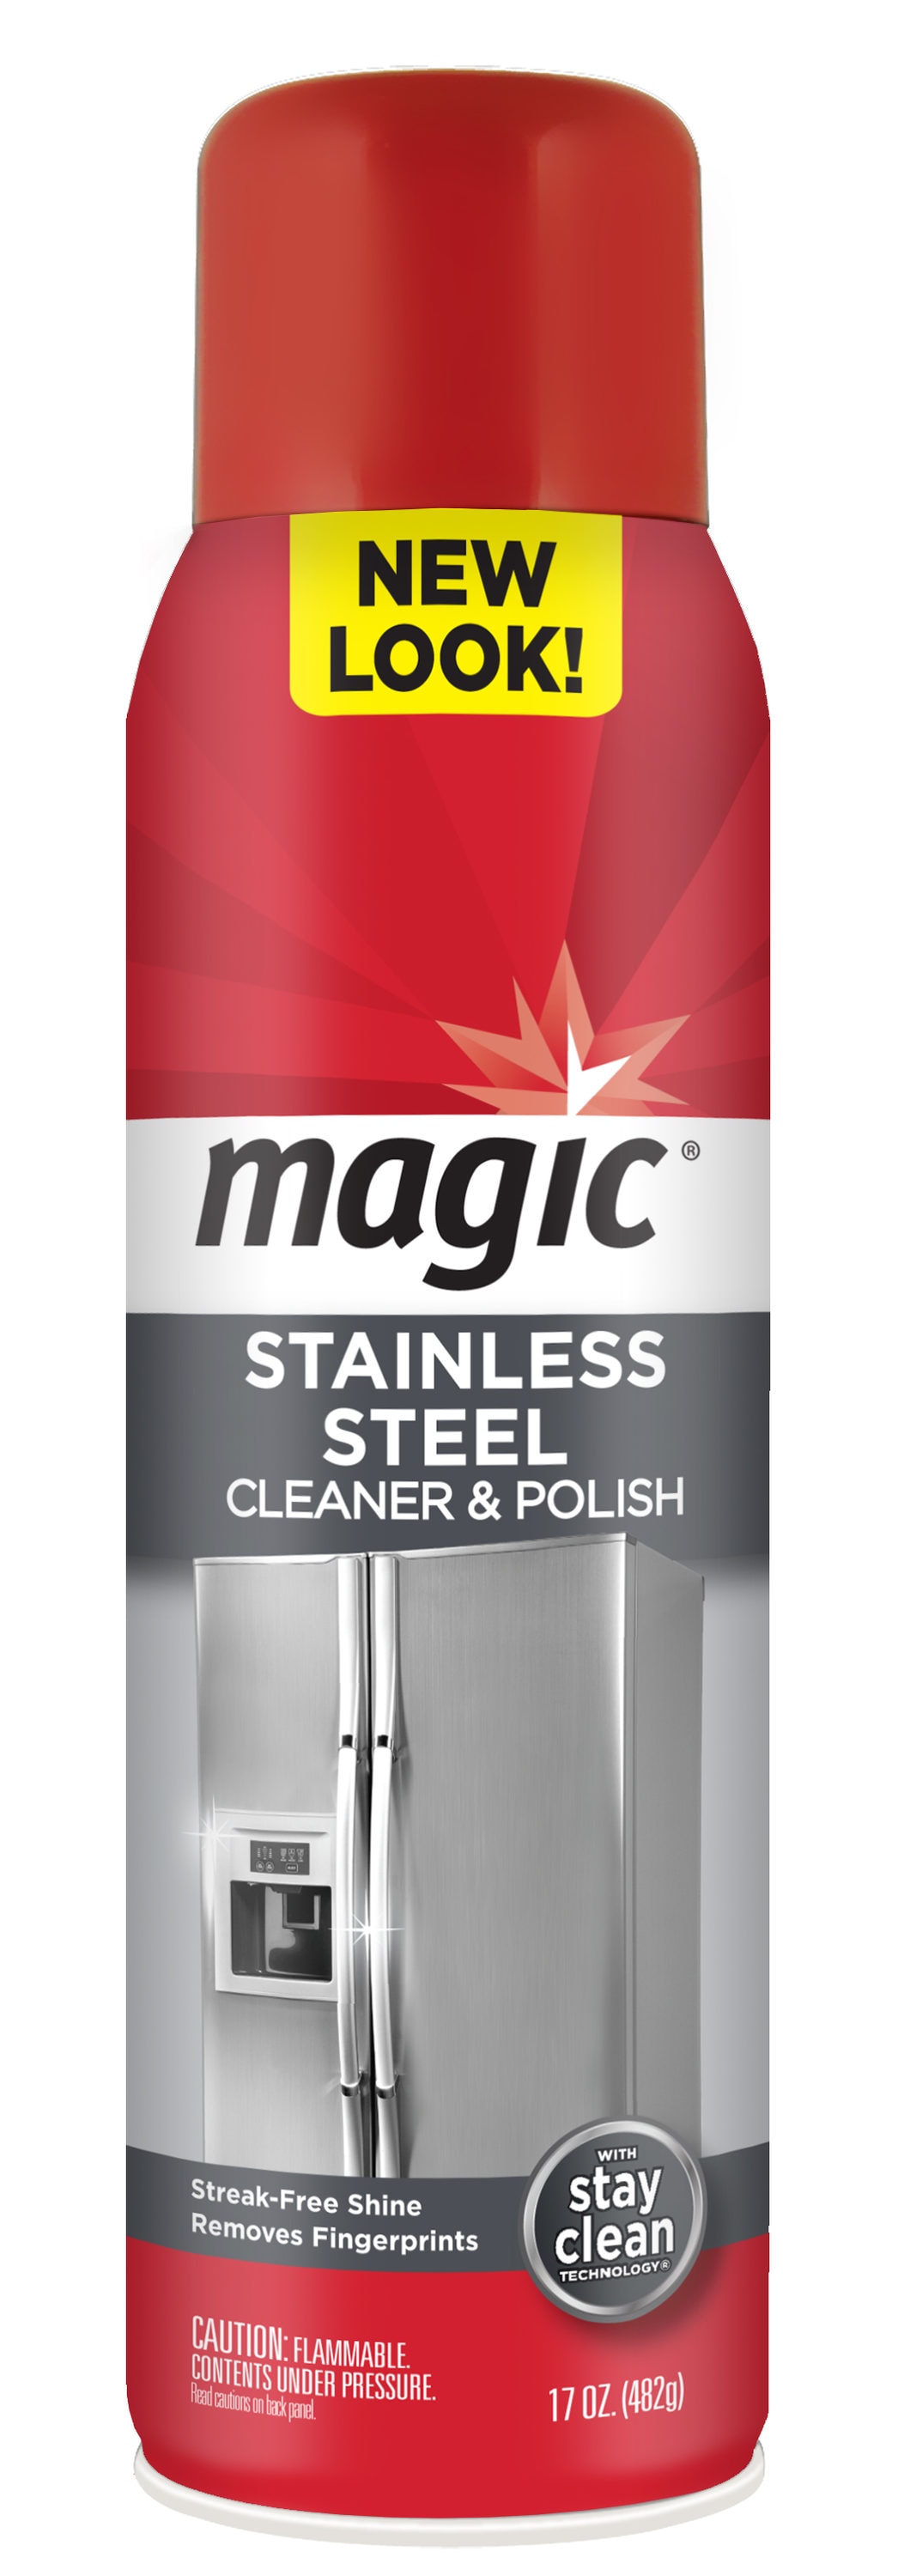 Magic 16-oz Glass Cooktop Cleaner and Polish - Removes Grease